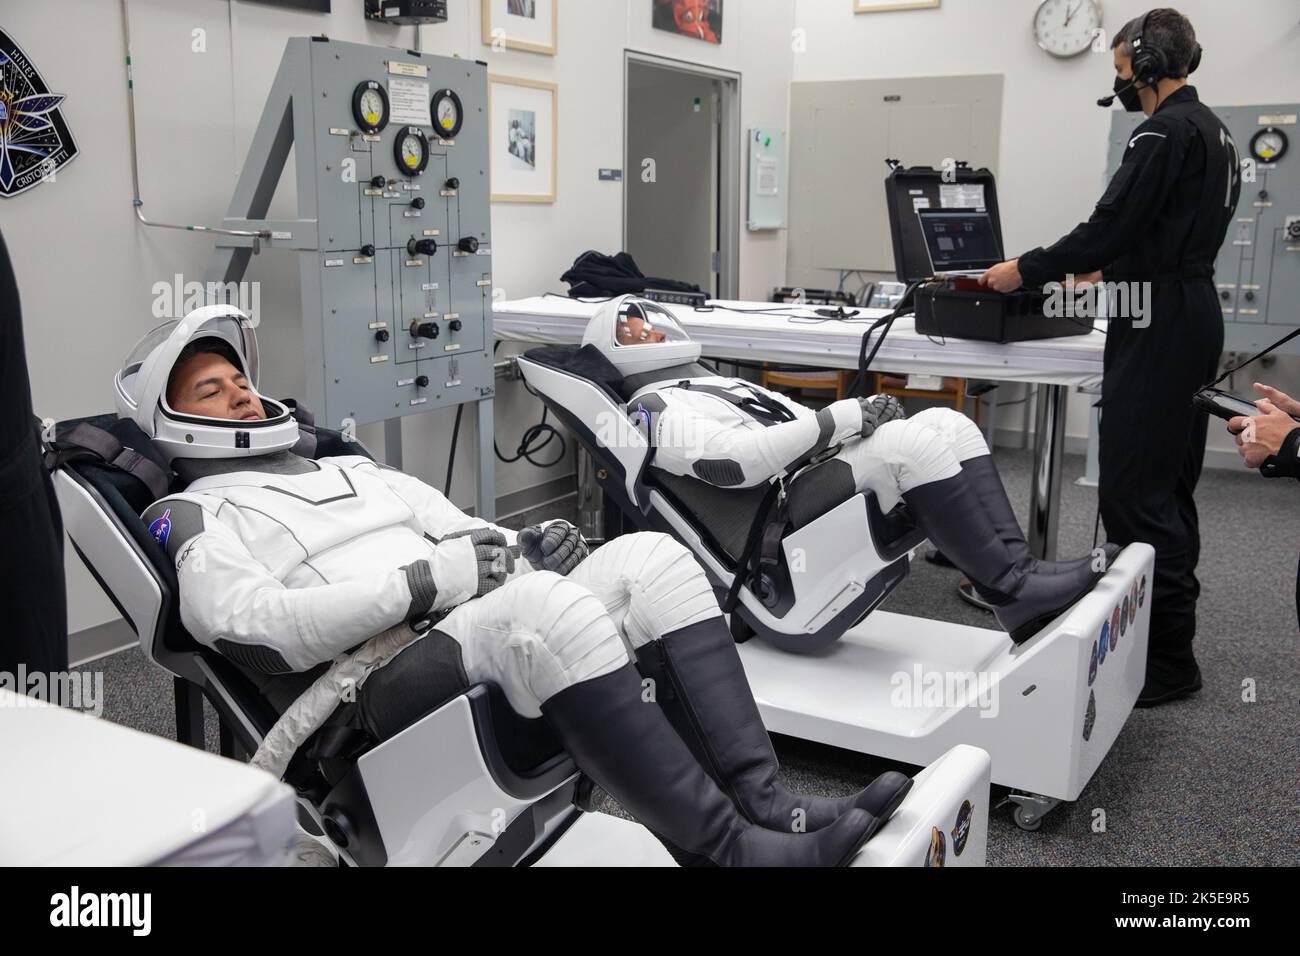 Crew-4 mission astronauts Kjell Lindgren, left, and Bob Hines relax in the suit room in the Astronaut Crew Quarters inside Kennedy Space Center’s Neil A. Armstrong Operations and Checkout Building on April 27, 2022. A team of SpaceX suit technicians assisted the crew as they put on their custom-fitted spacesuits and checked the suits for leaks. Astronauts Jessica Watkins and Samantha Cristoforetti will join Lindgren and Hines aboard SpaceX’s Crew Dragon, powered by the company’s Falcon 9 rocket, which will carry the four-person crew to the International Space Station as part of NASA’s Commerci Stock Photo